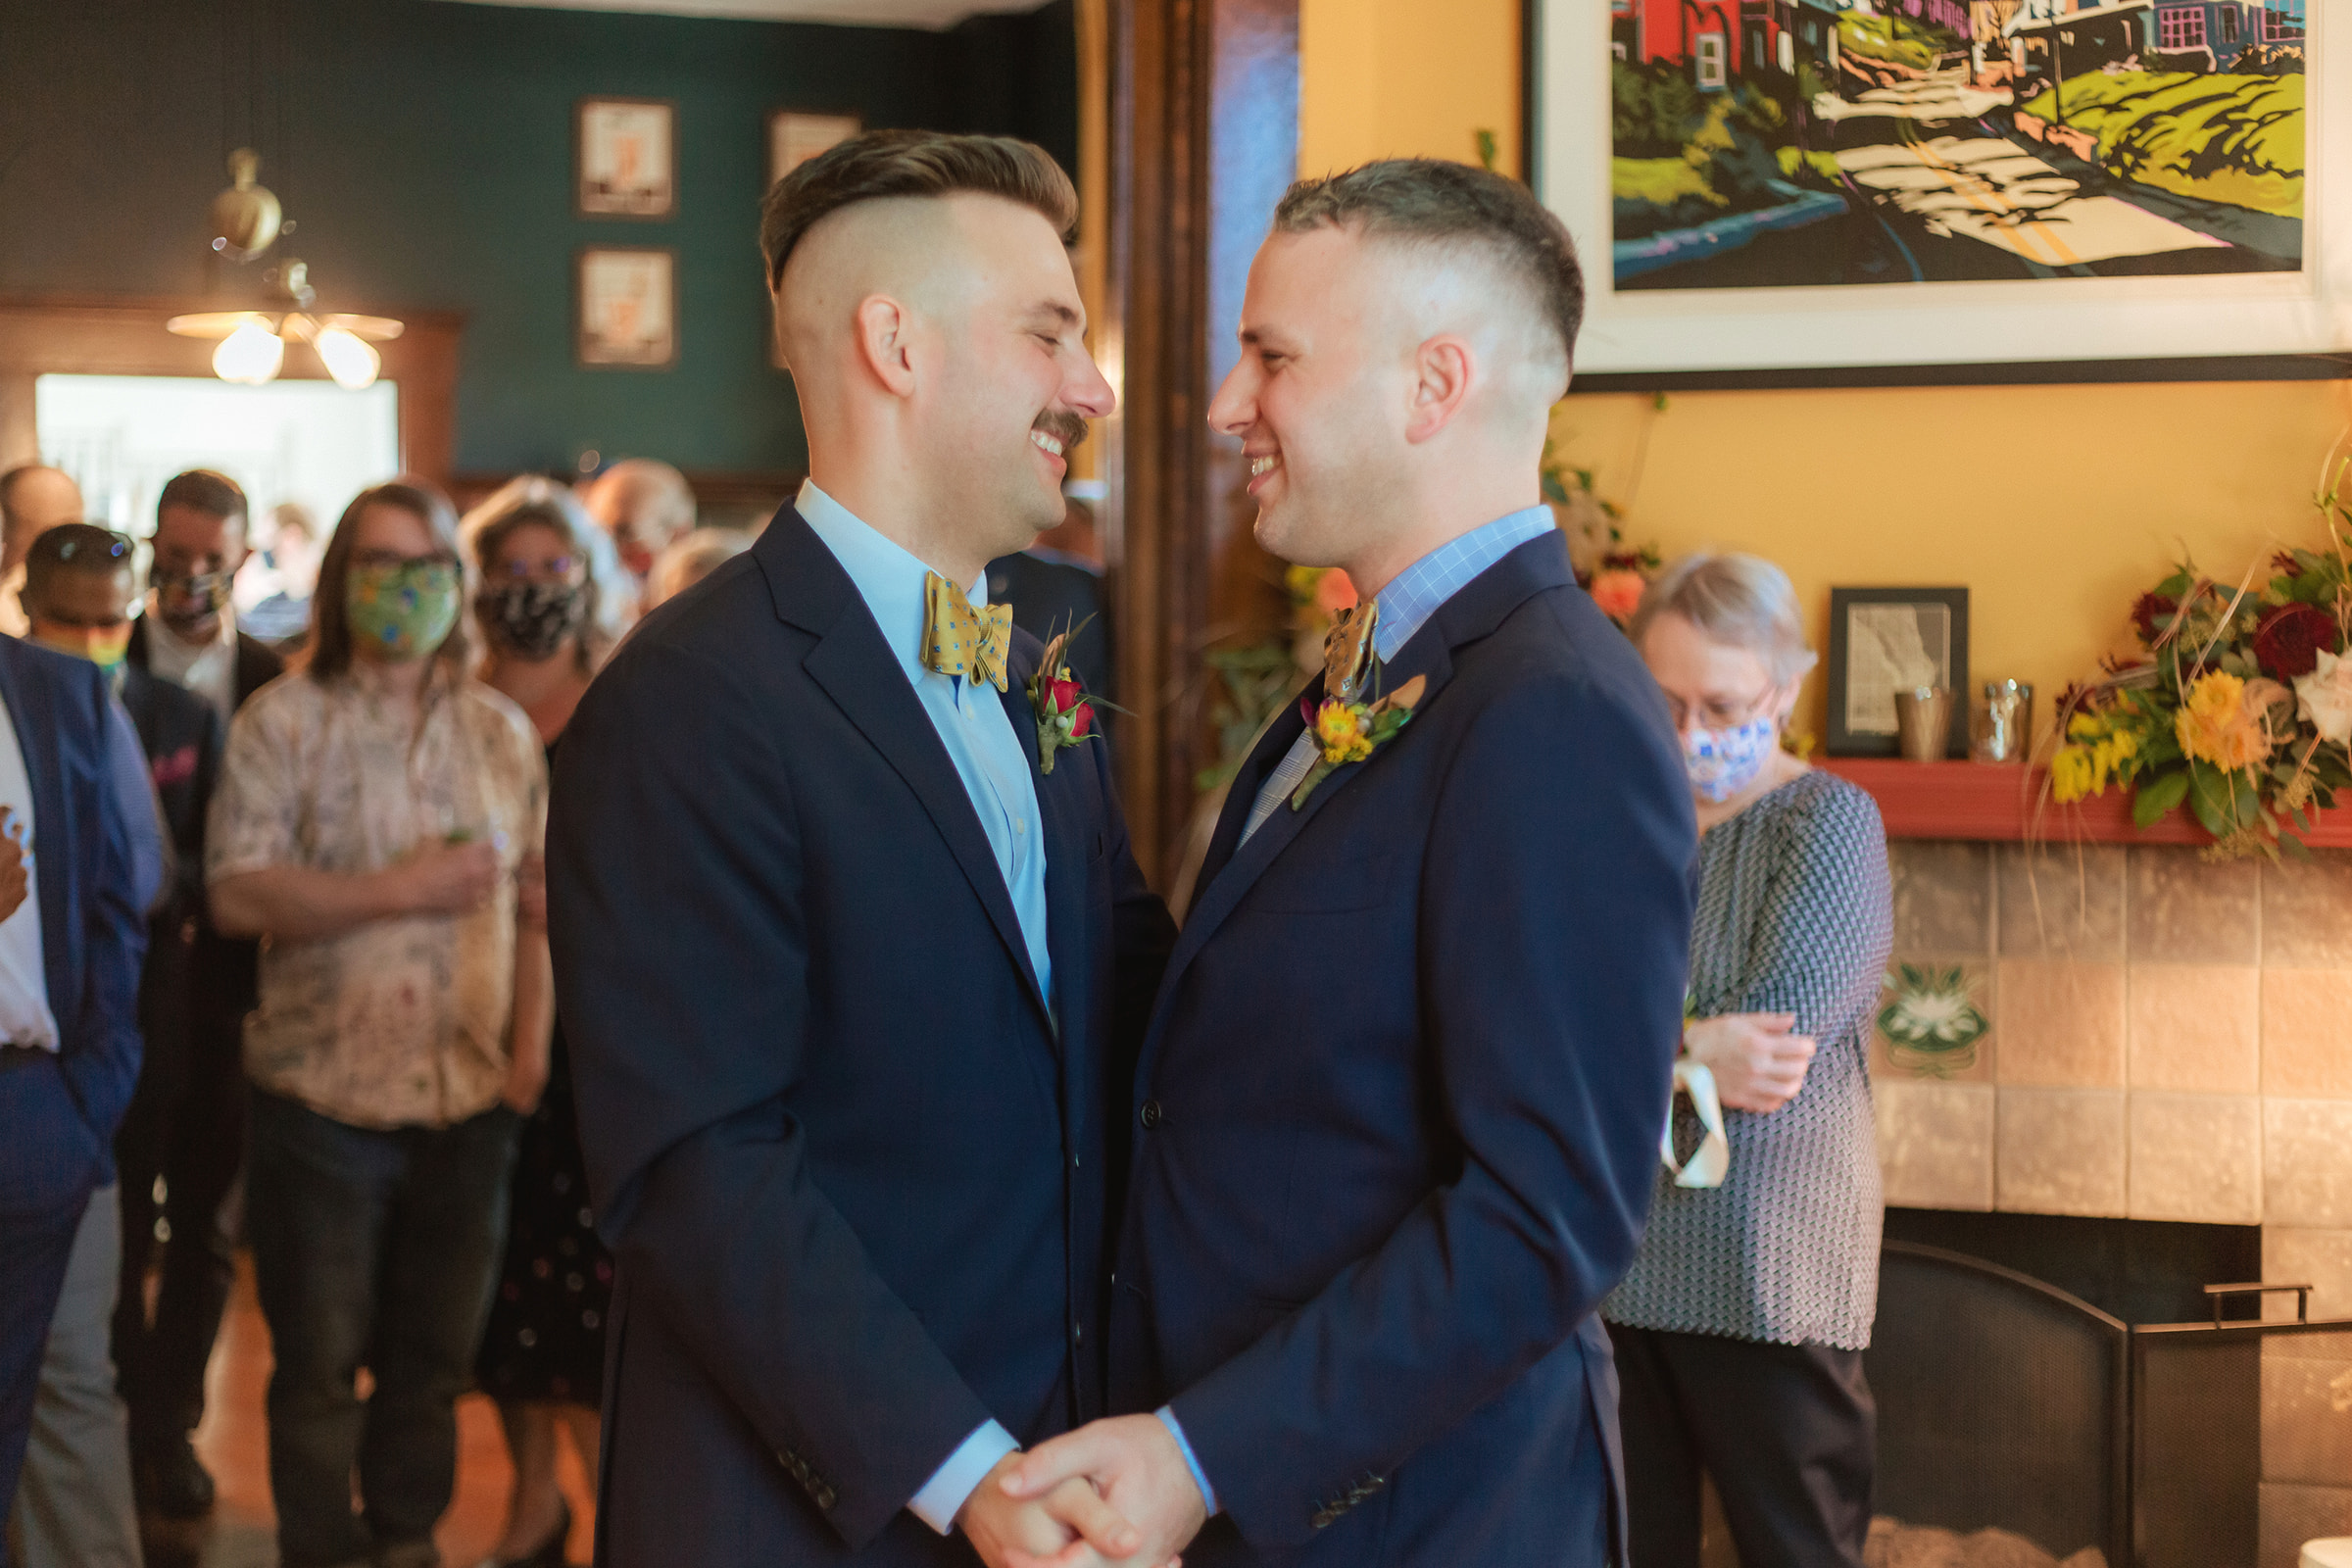 two grooms smiling at each other holding hands